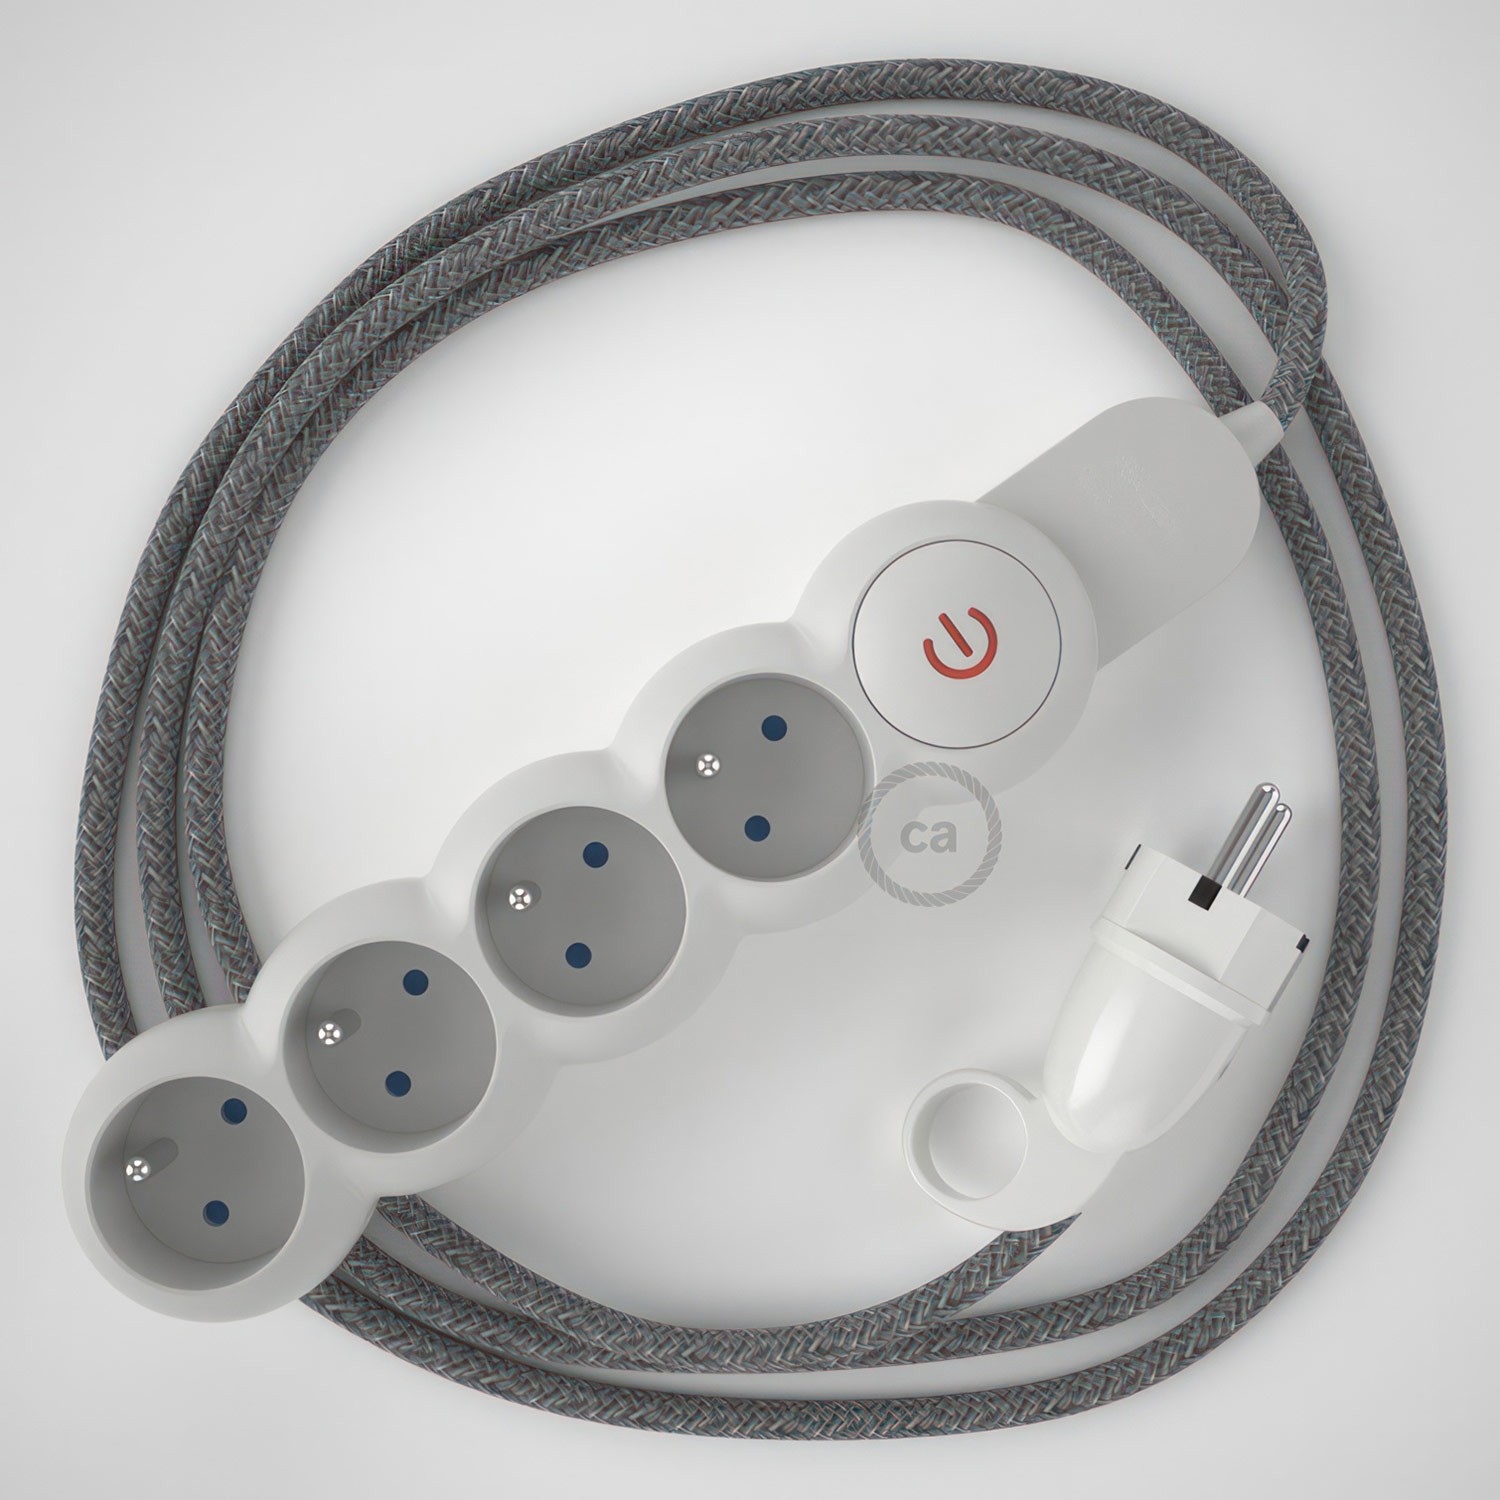 French Power Strip with electrical cable covered in Grey Natural Linen fabric RN02 and Schuko plug with confort ring